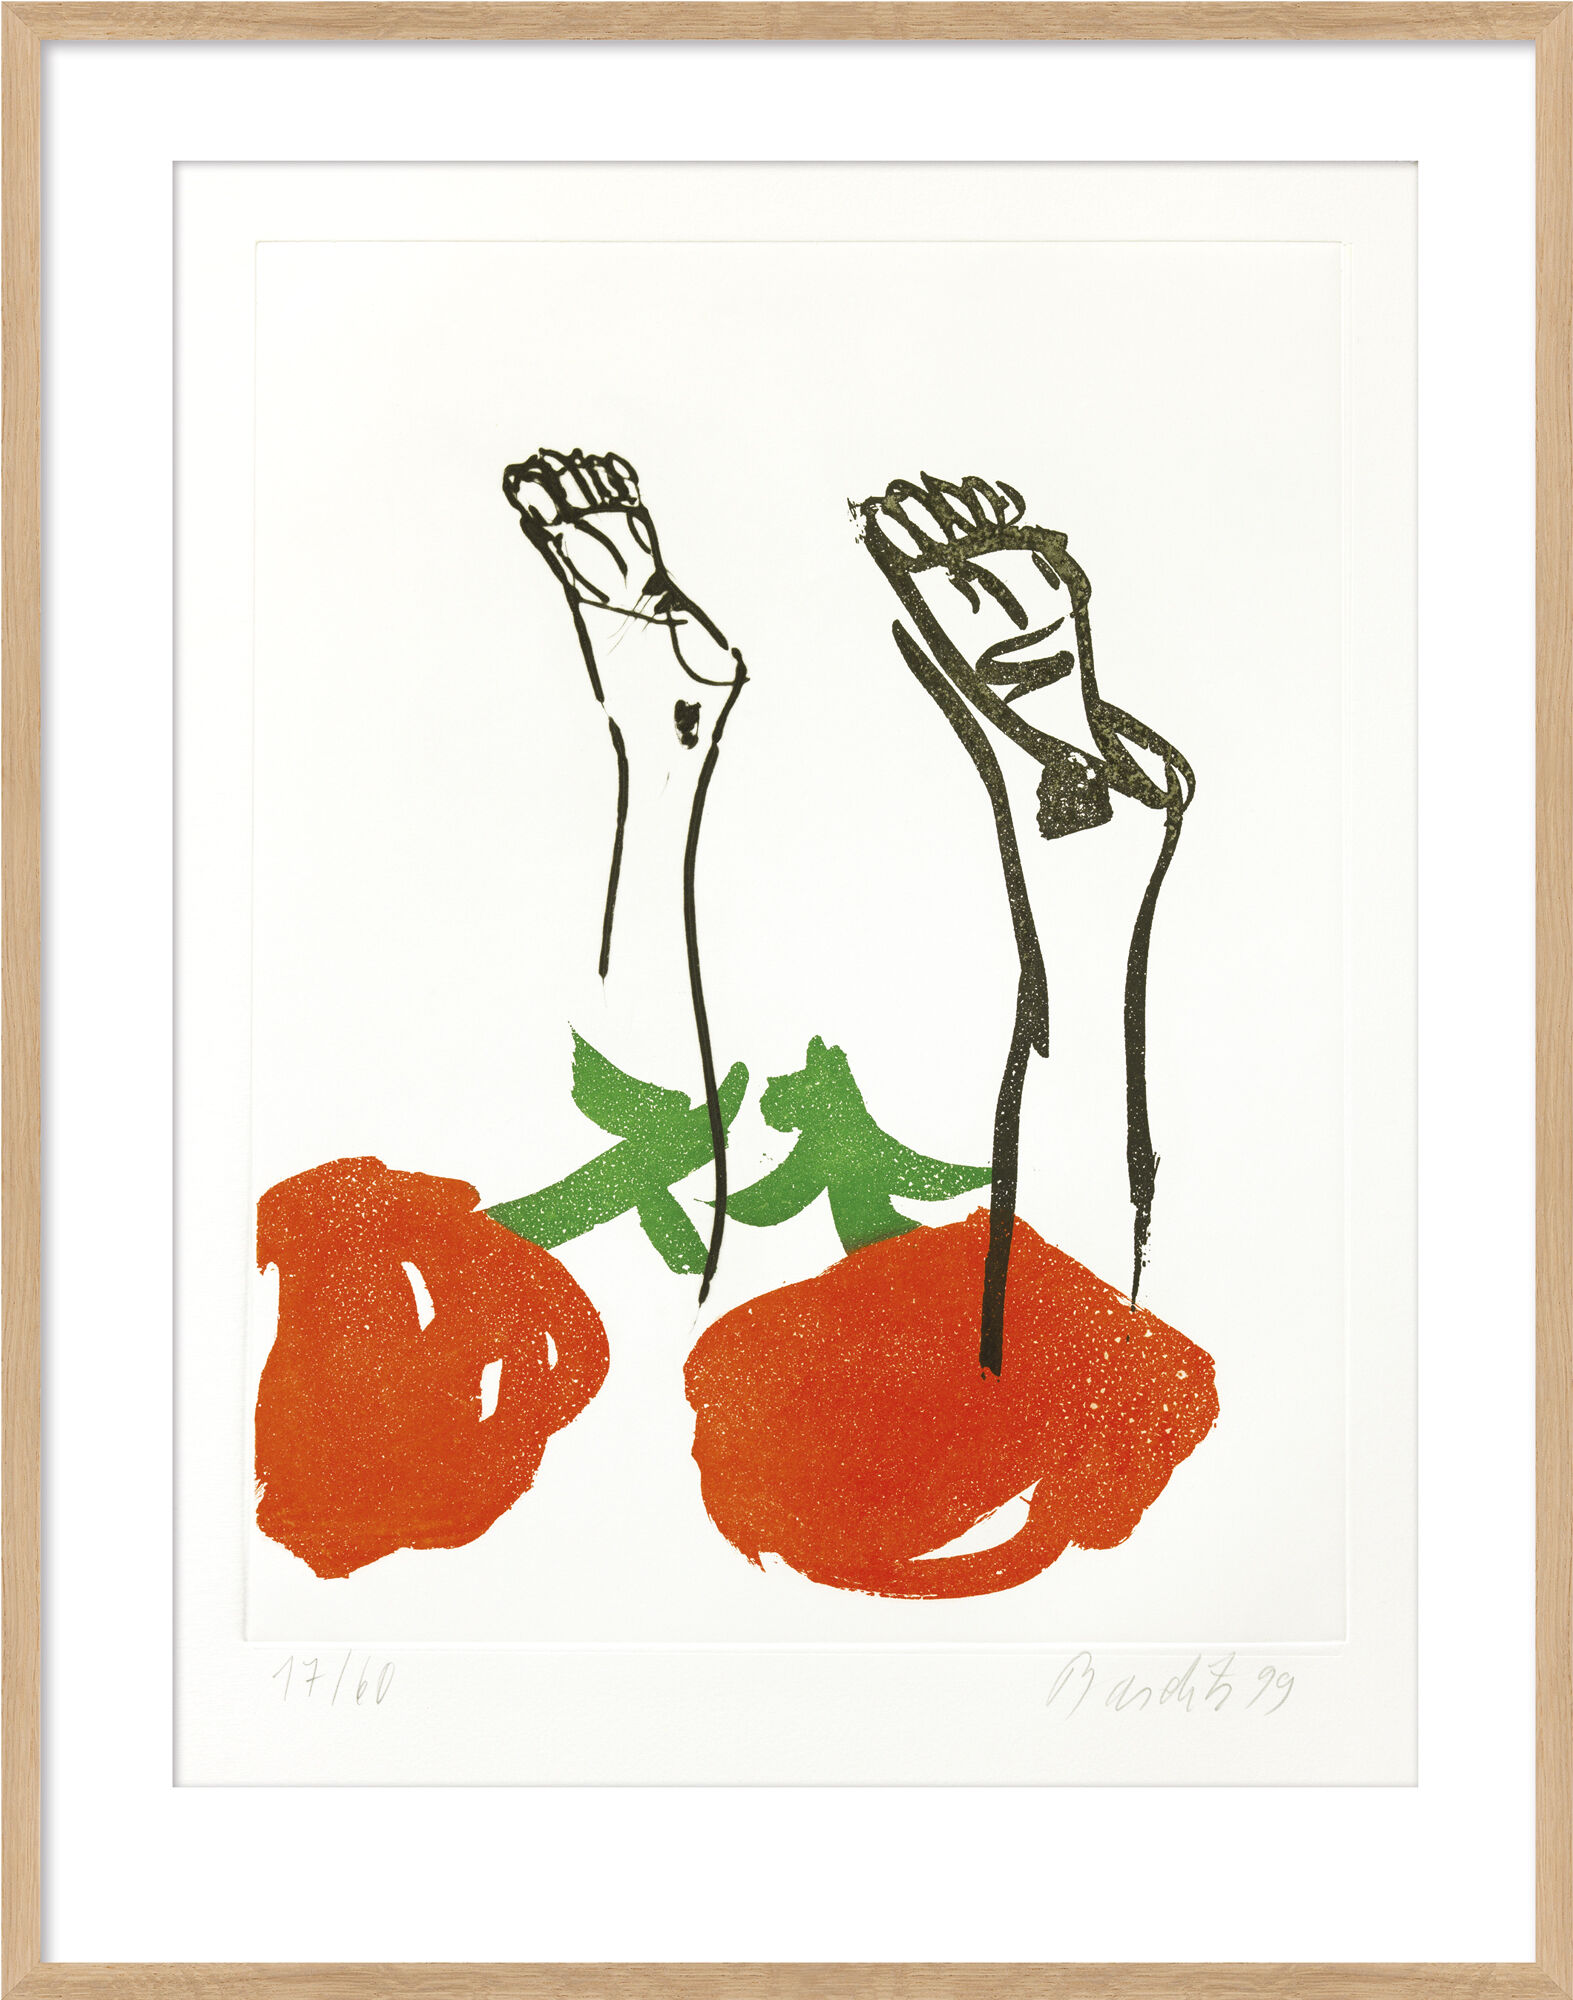 Picture "Untitled IX." from the portfolio "Signs" (1999/2000) by Georg Baselitz